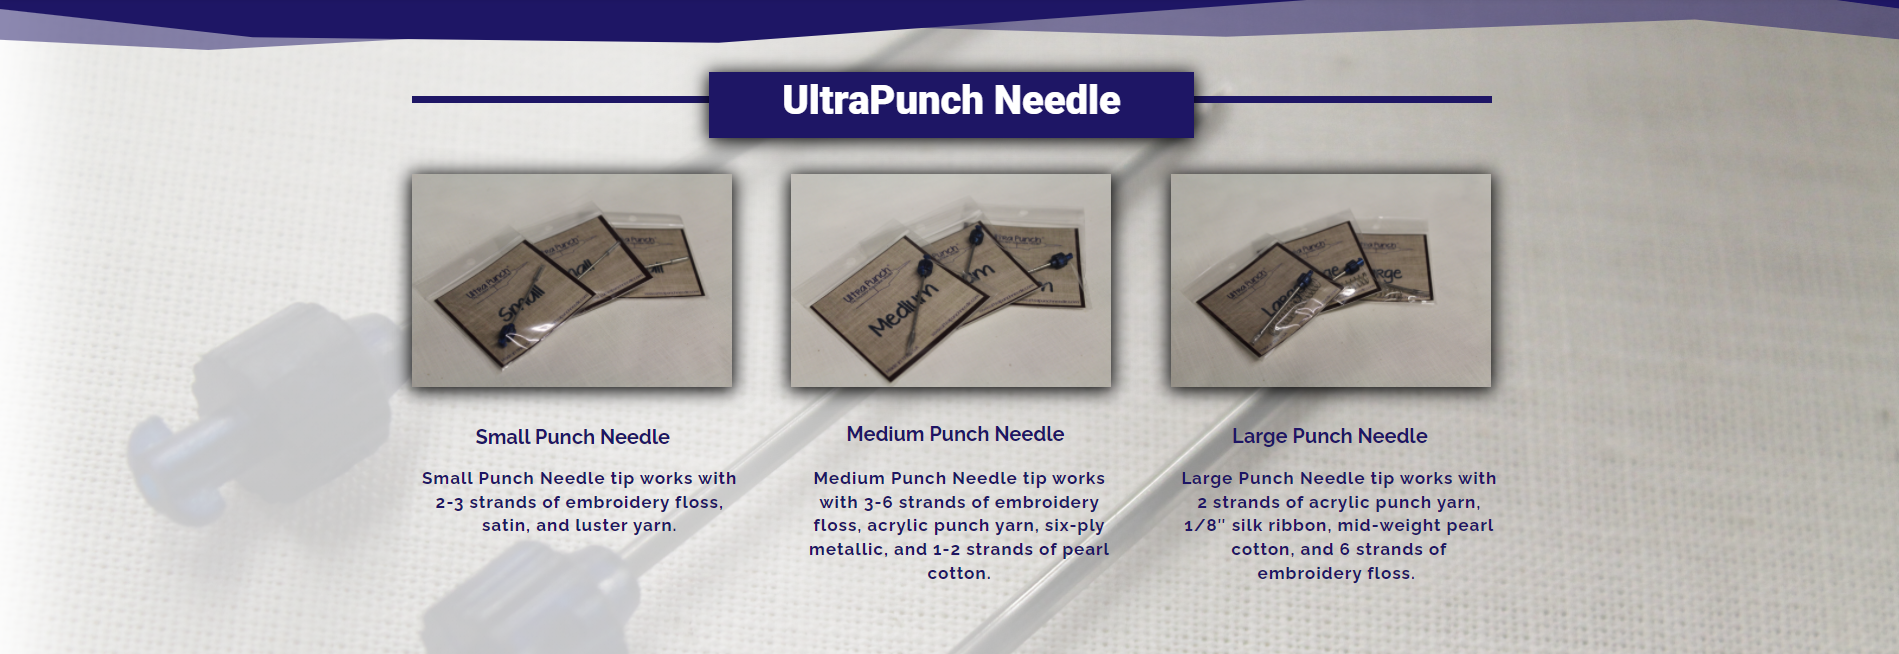 Ultra Punch Needle Set w/ Extra Threaders - 03472292726055555555